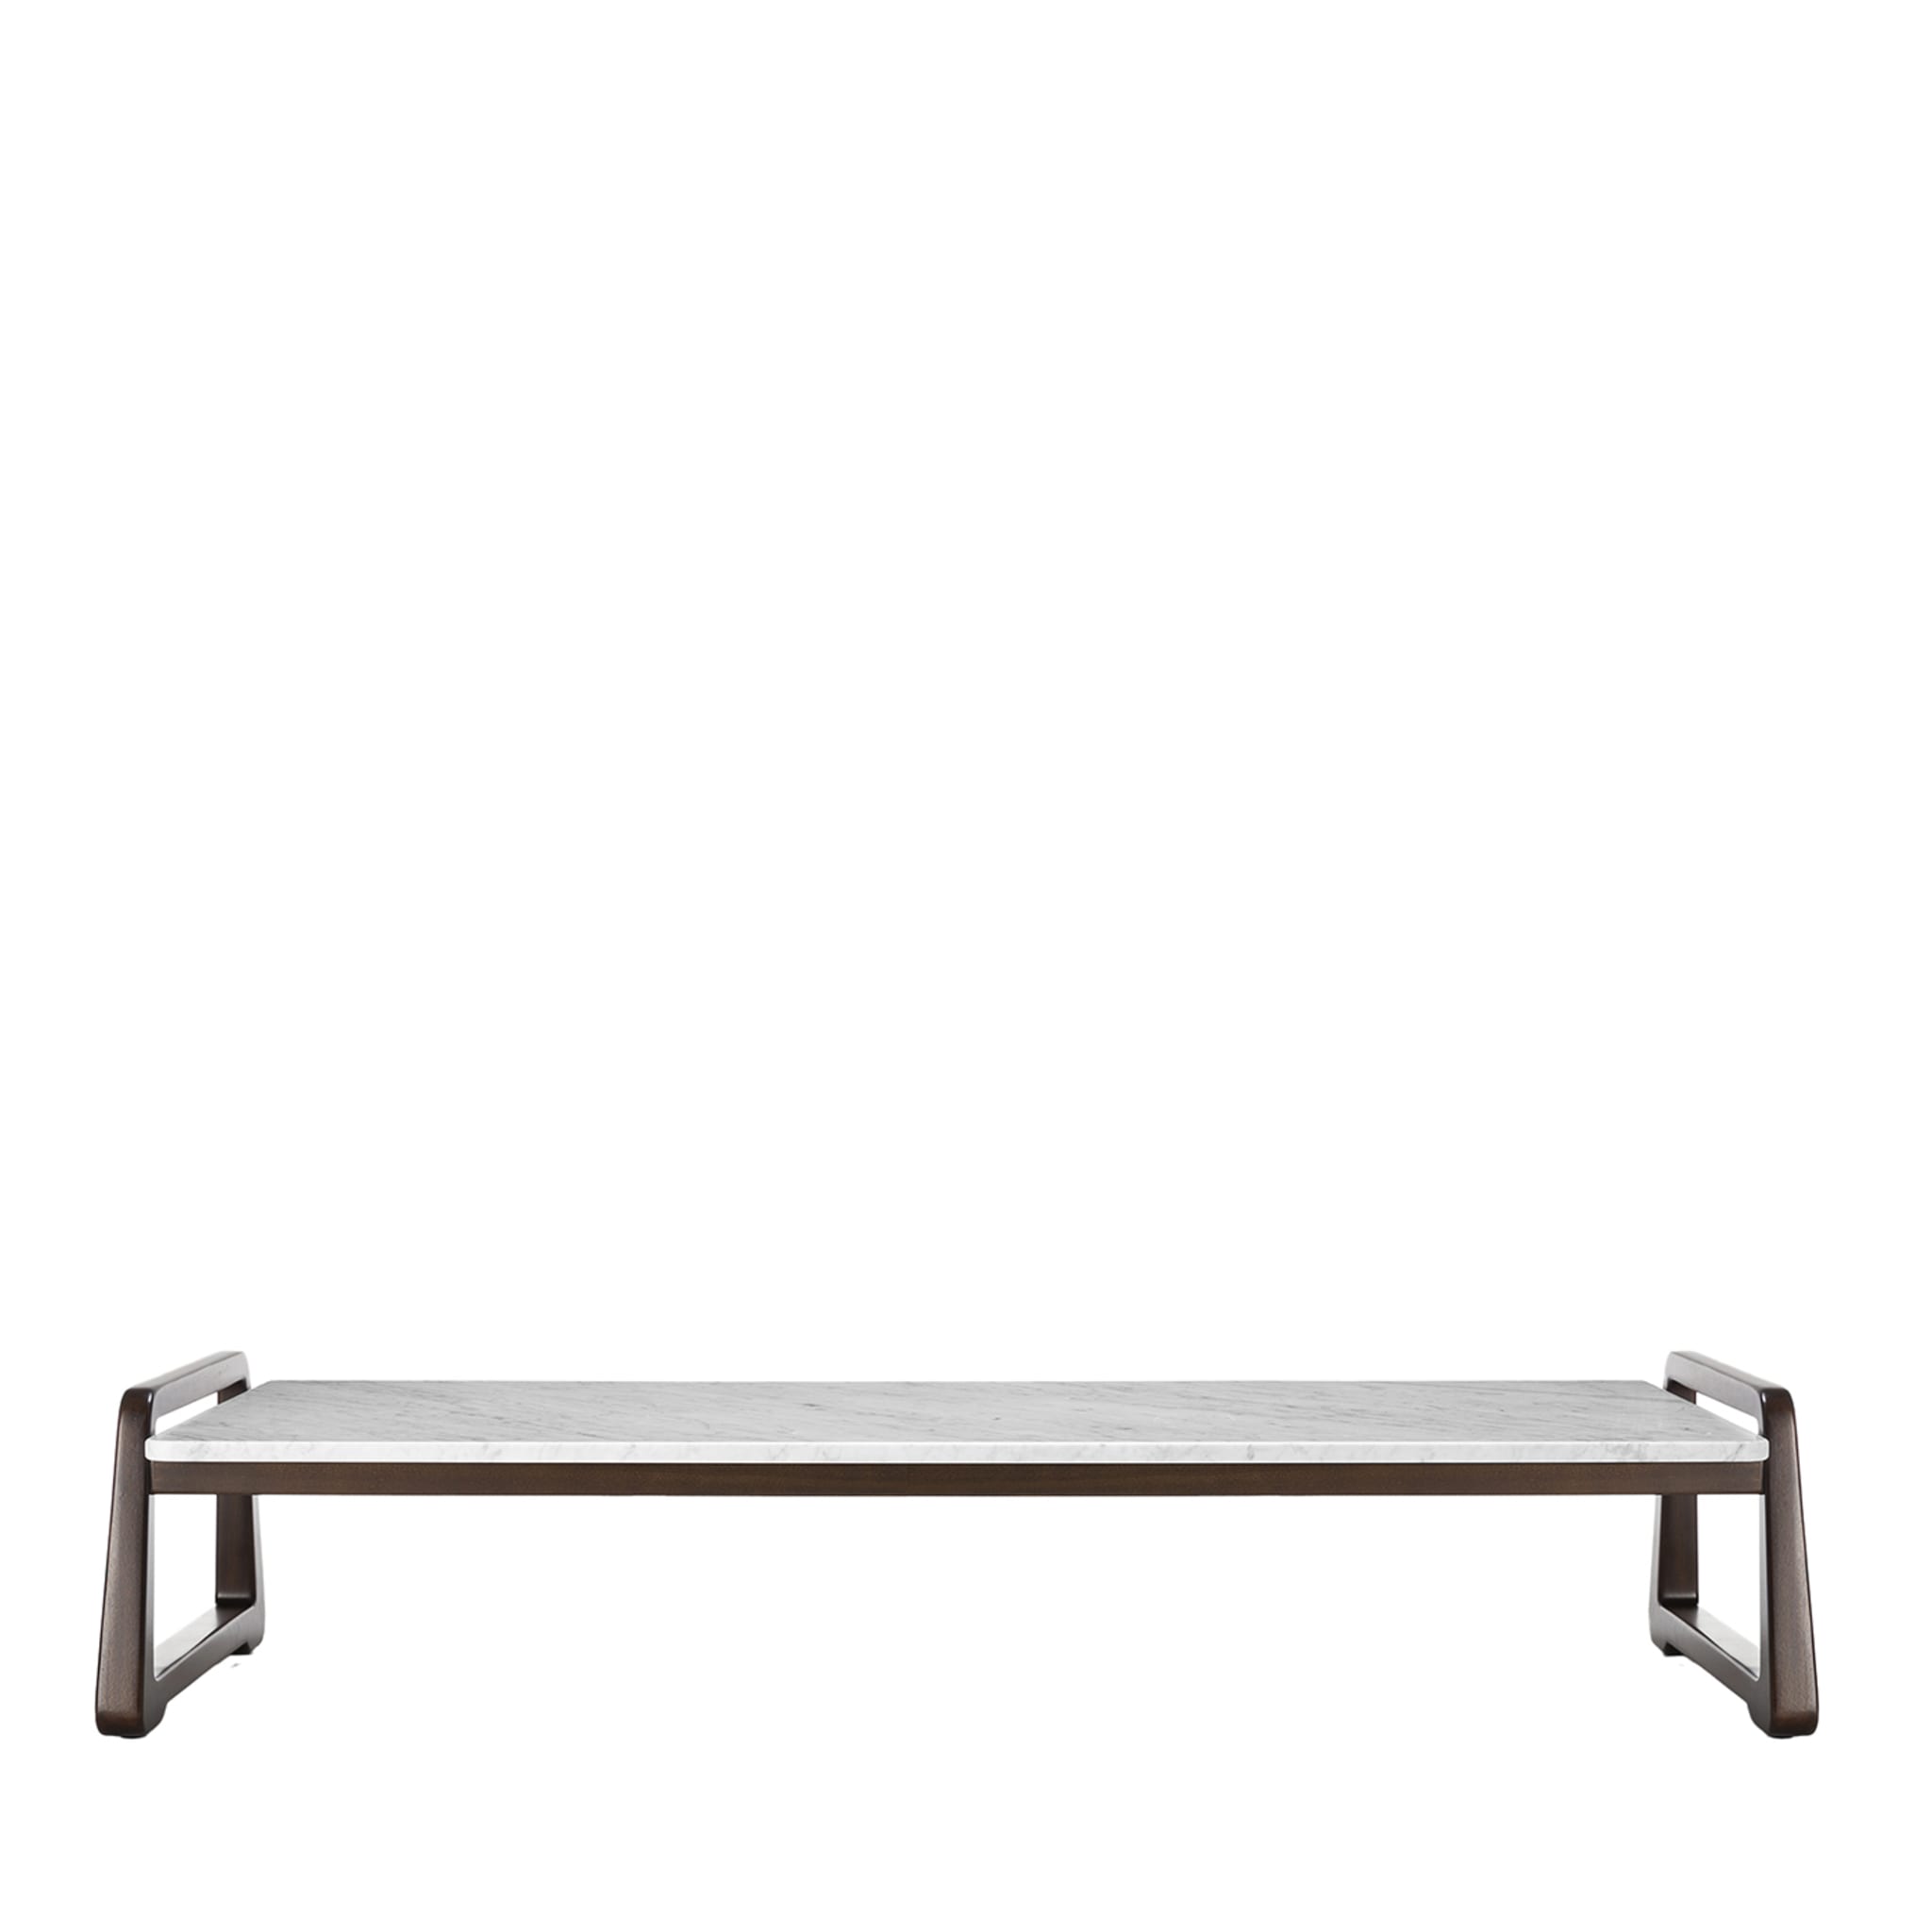 Sunset Rectangular Coffee Table by Paola Navone - Main view